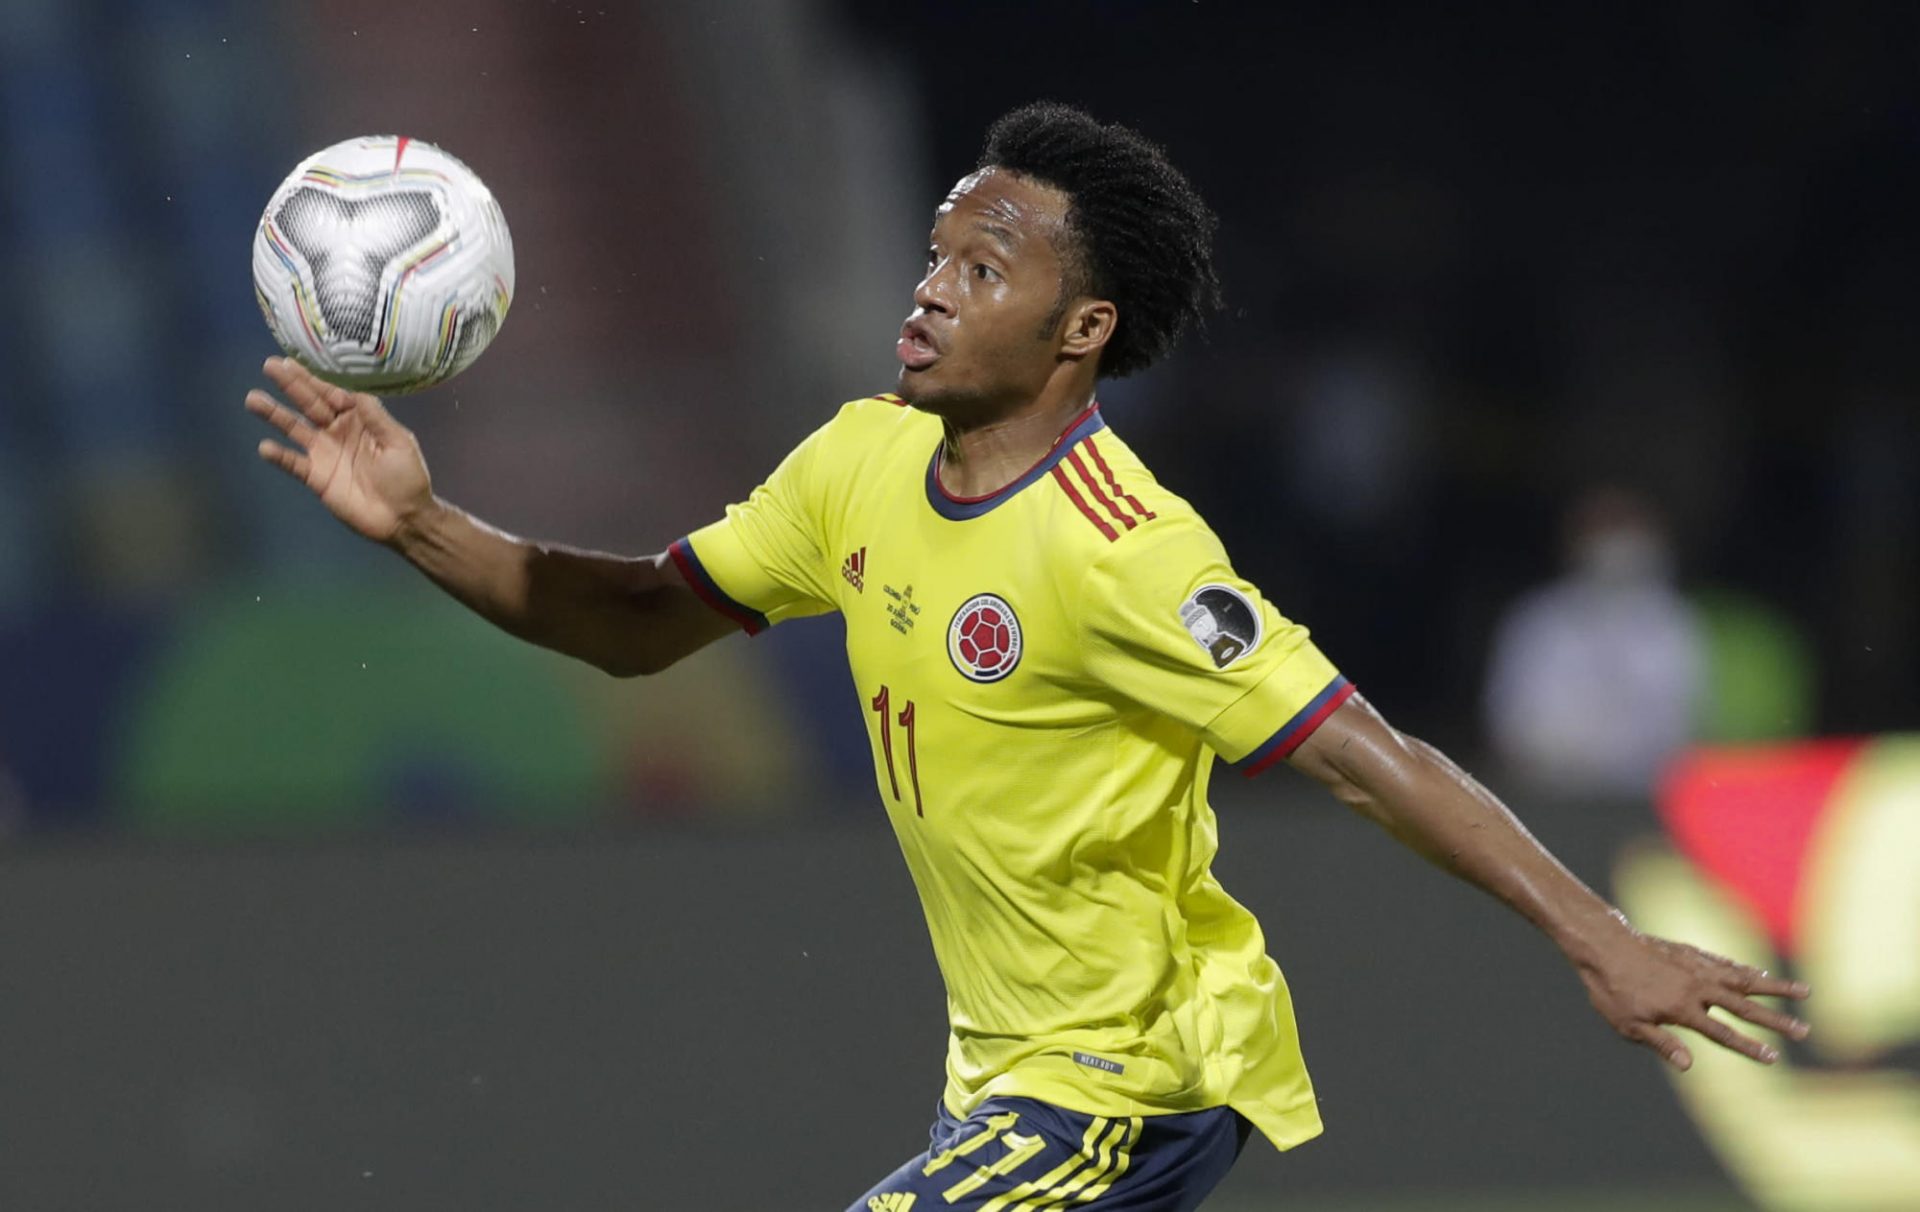 Colombia and Peru play for honor, third space at Copa The US